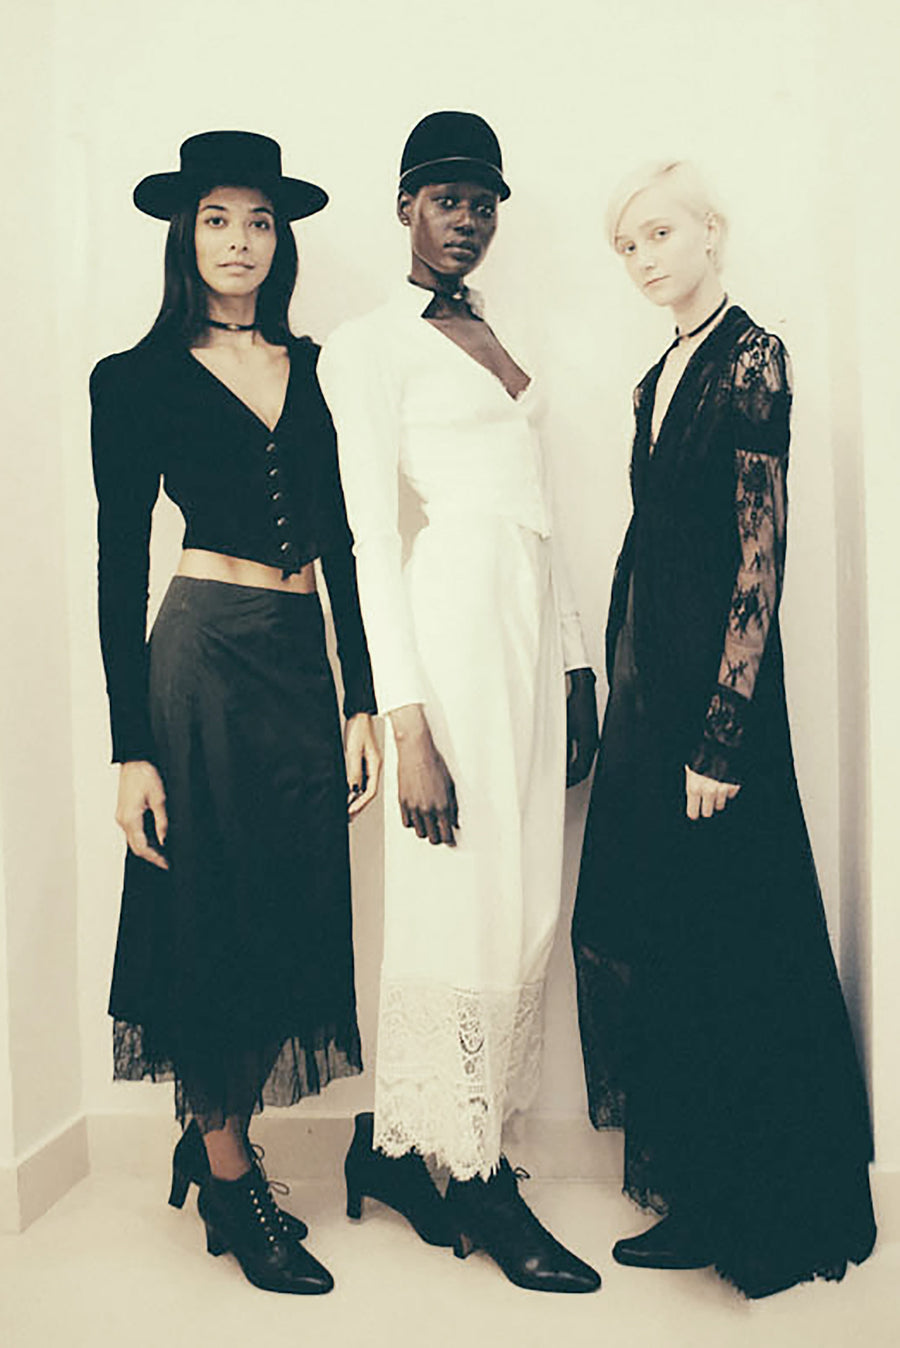 Heidy de la Rosa Model Ajak Deng Juliette Fazekas IMG Models Fitted Black Suede Victorian Jacket & Tulle Trim Silk Skirt Wendy Nichol Clothing Designer Fashion Runway show SS15 Space Master handmade in NYC New York City Bespoke Made To Measure Made to Order custom Tailoring